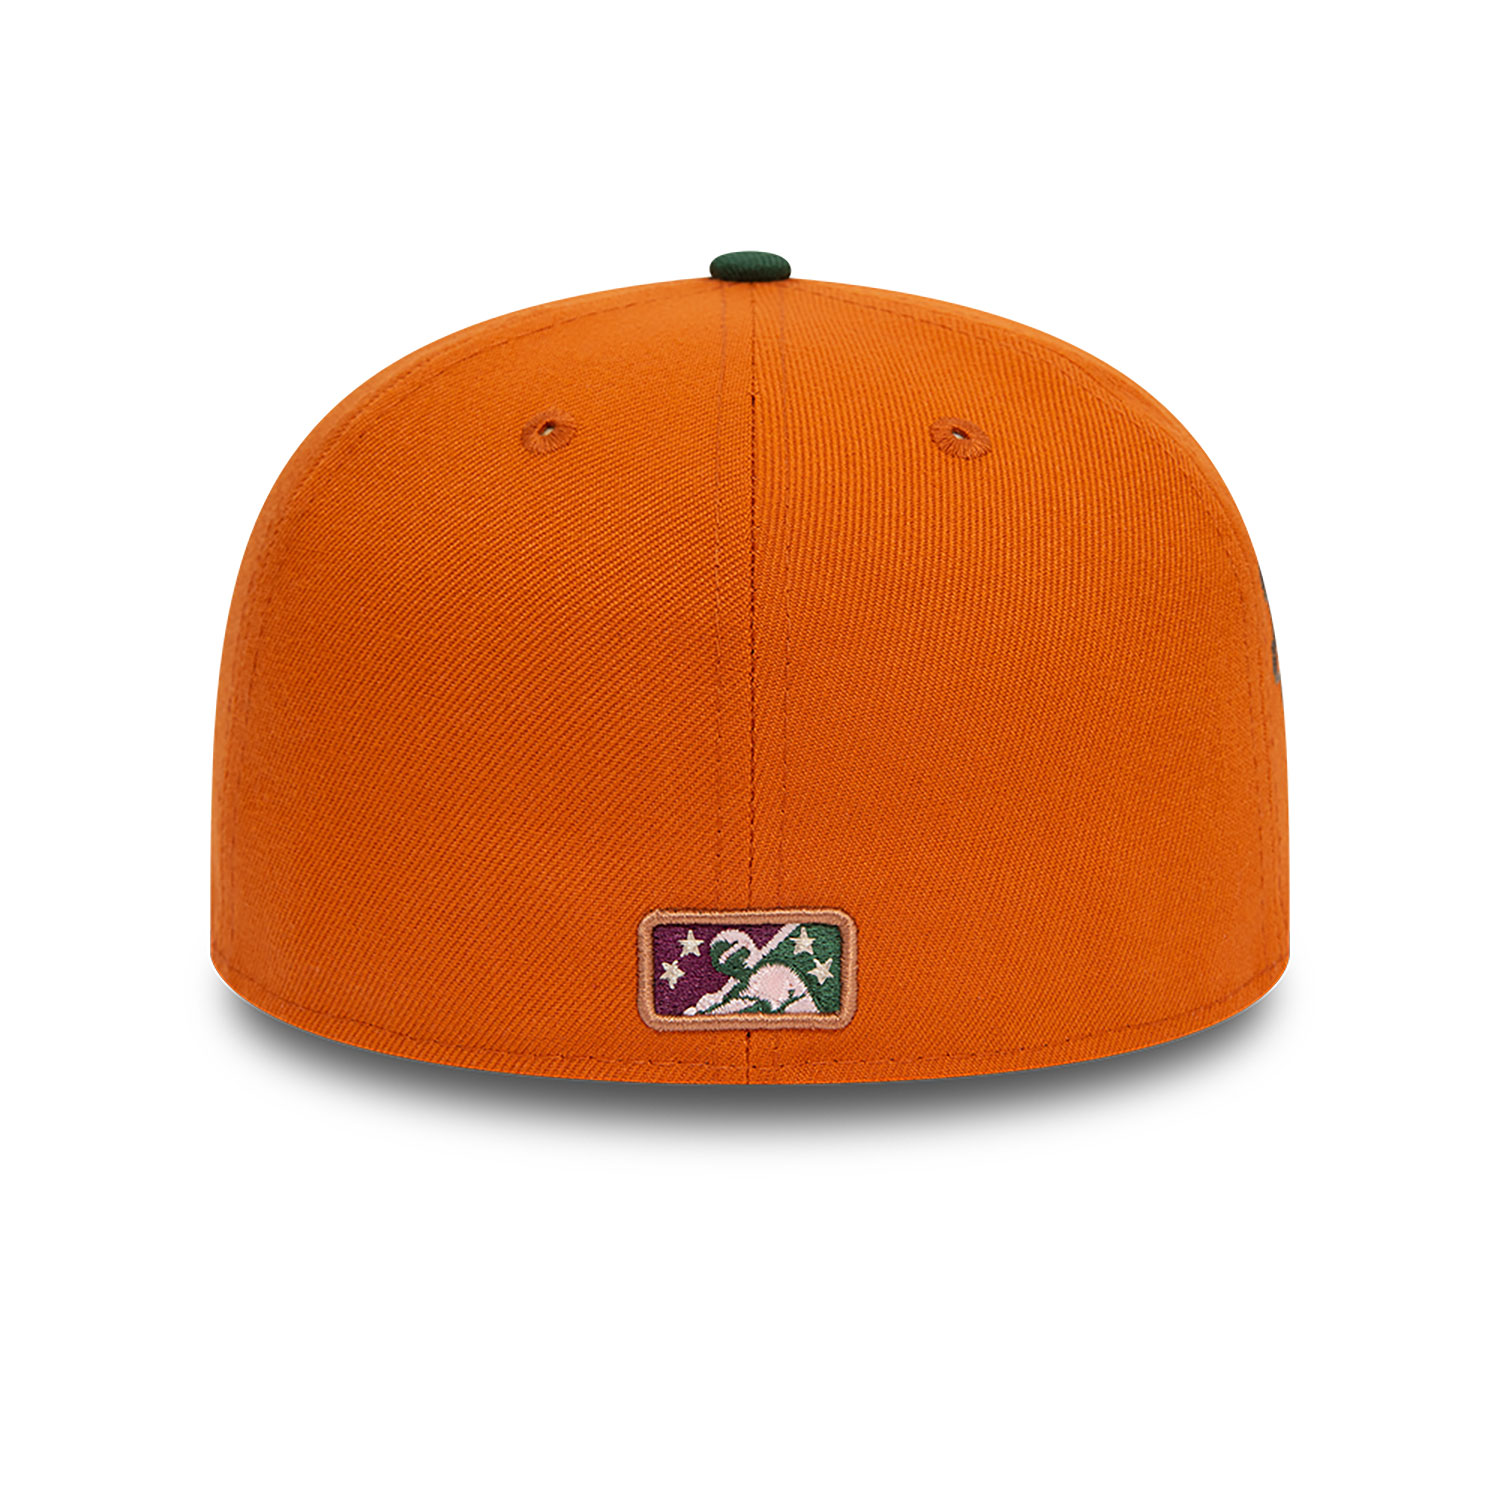 Buffalo Bisons MiLB Orange 59FIFTY Fitted Cap